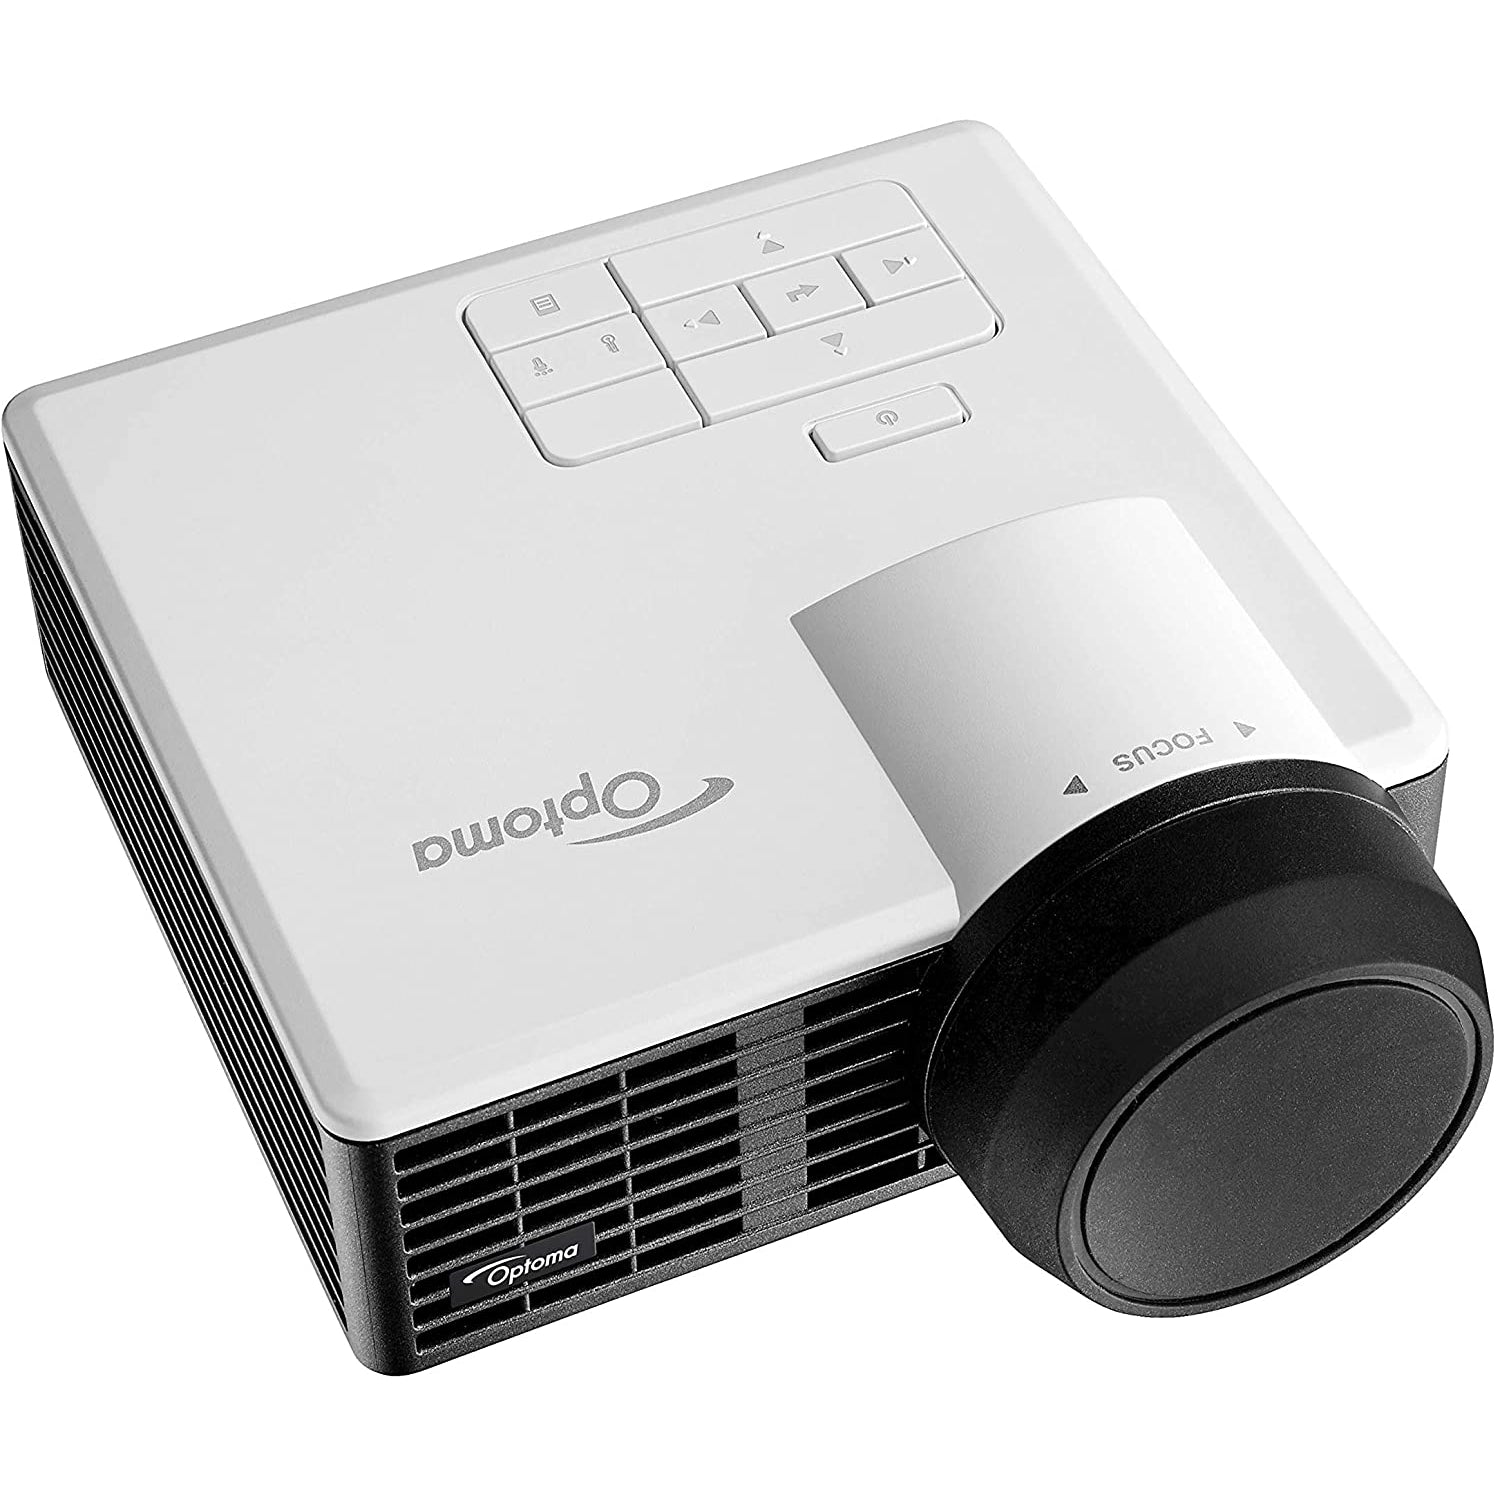 Optoma ML1050ST Compact Projector - White / Black